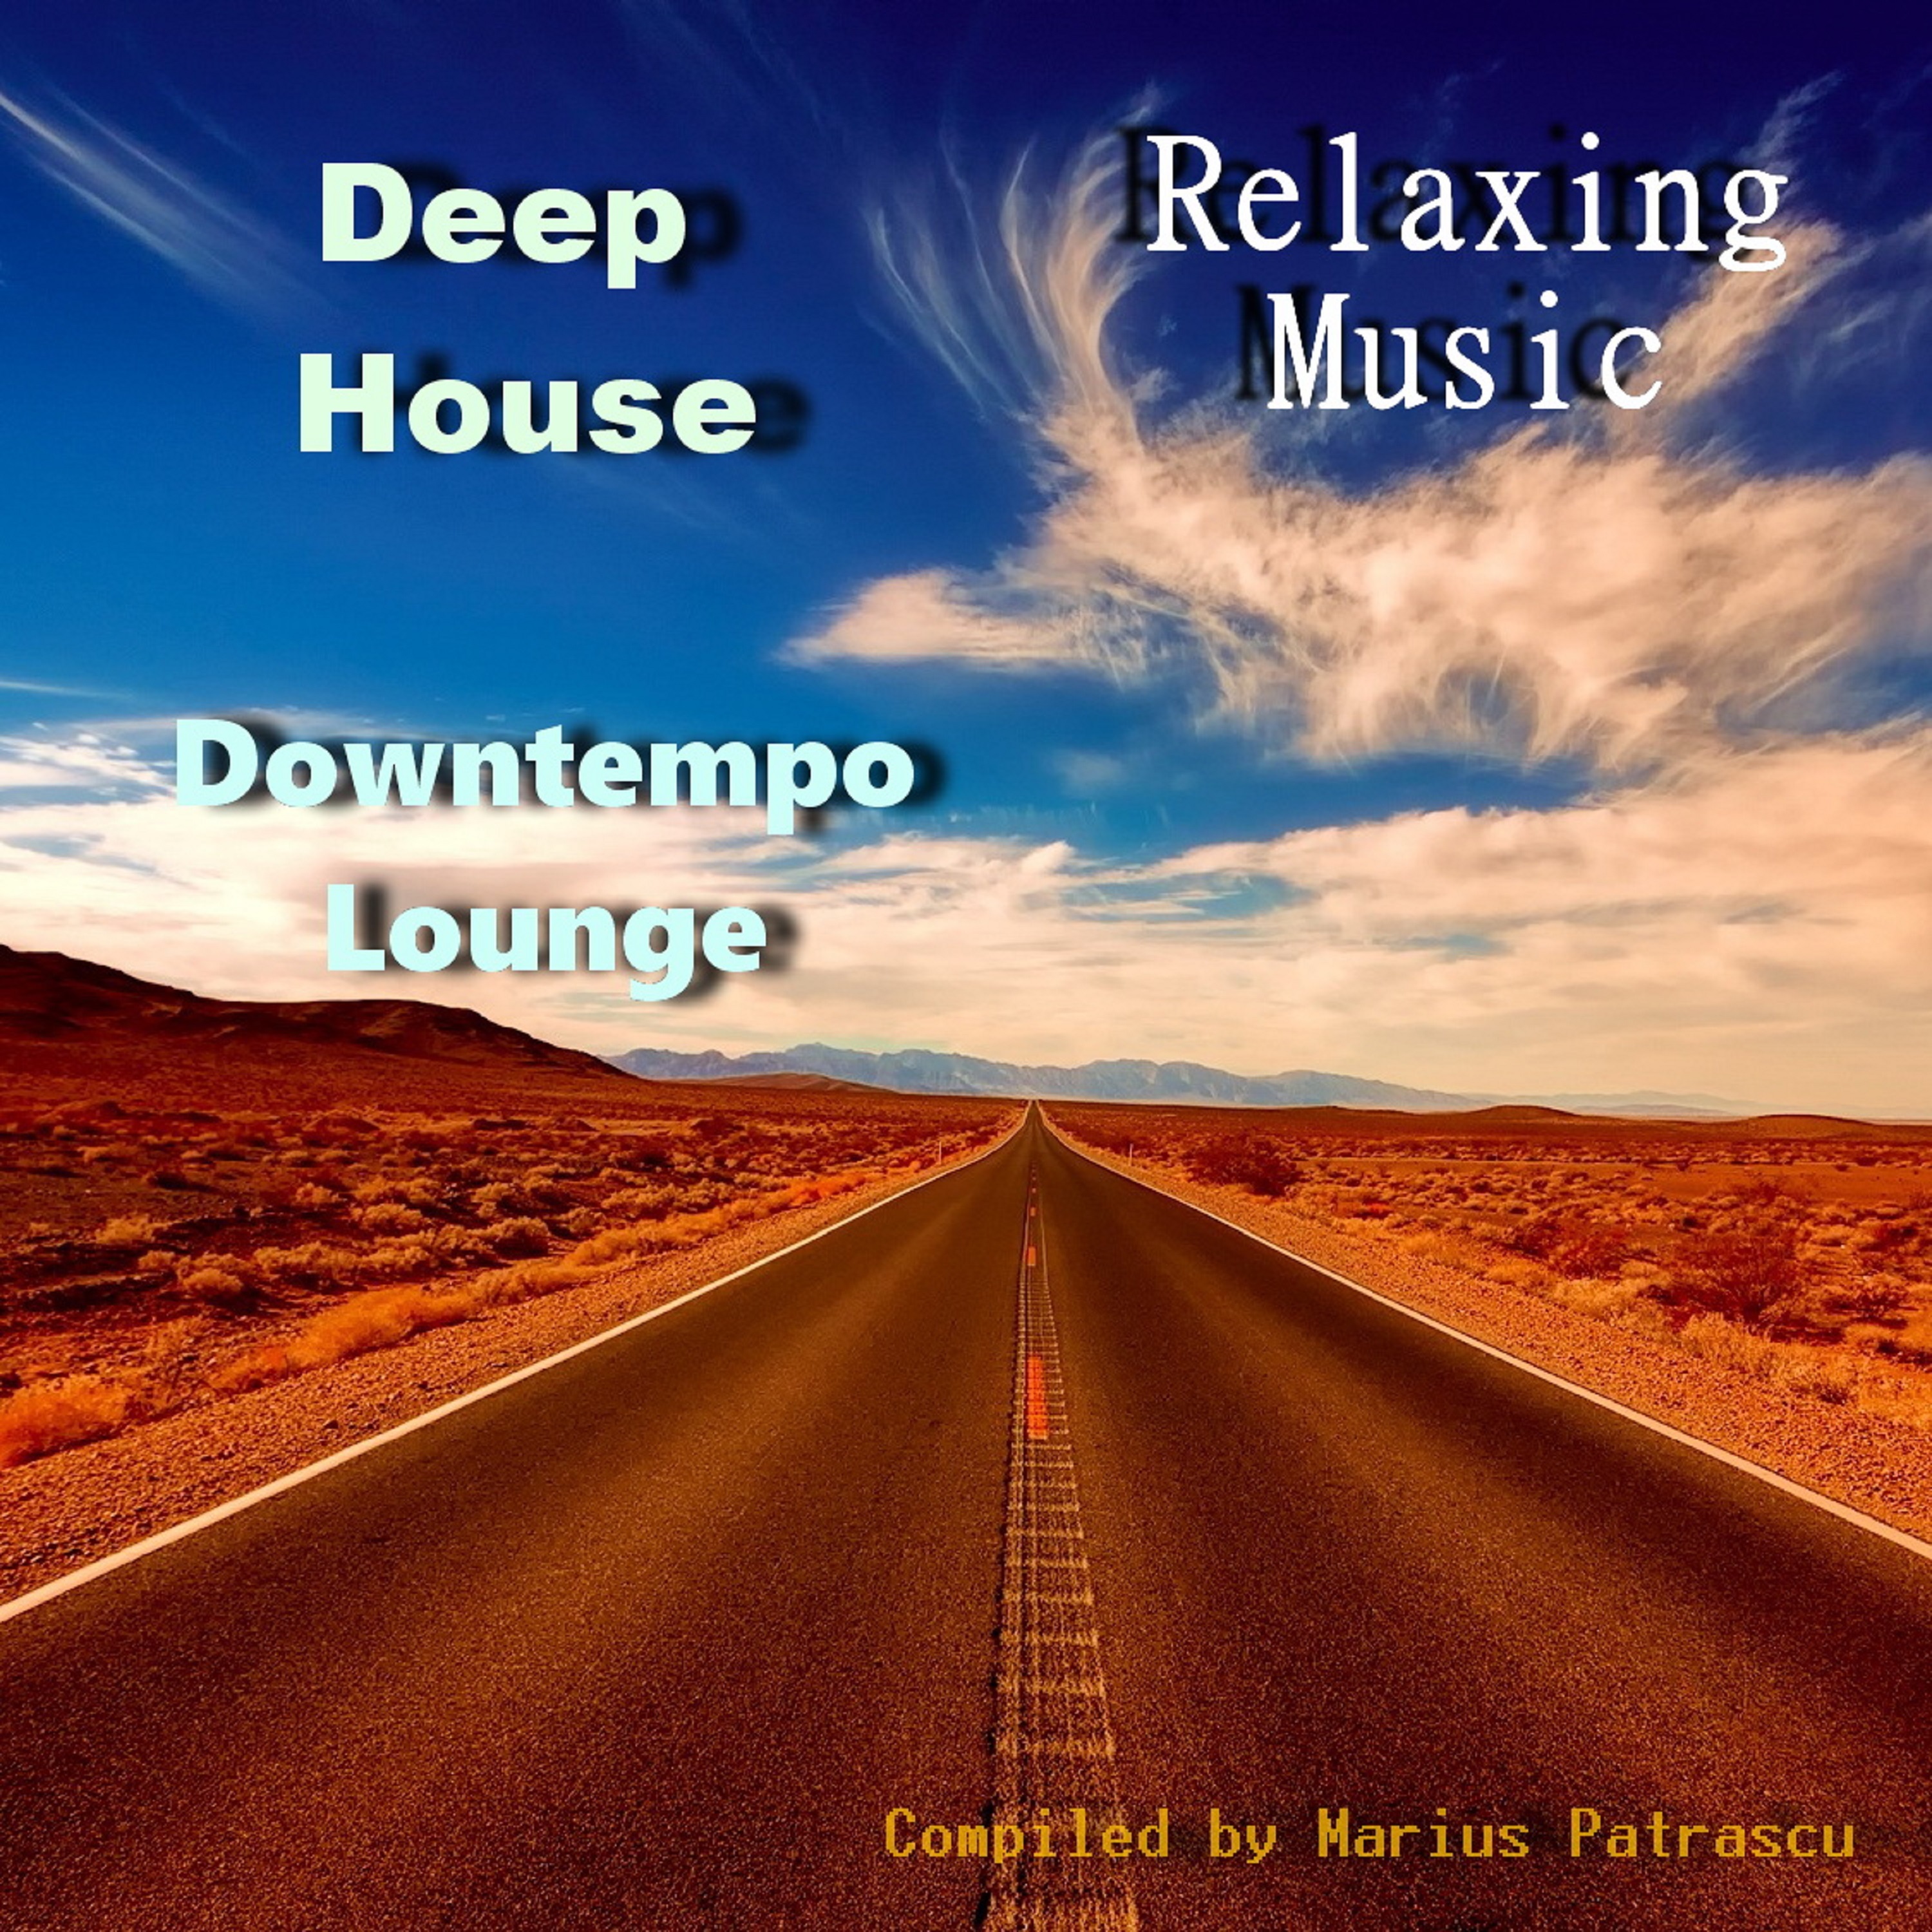 Deep House Downtempo Lounge Relaxing Music (Mixed By Marius Patrascu) [Continuous DJ Mix]